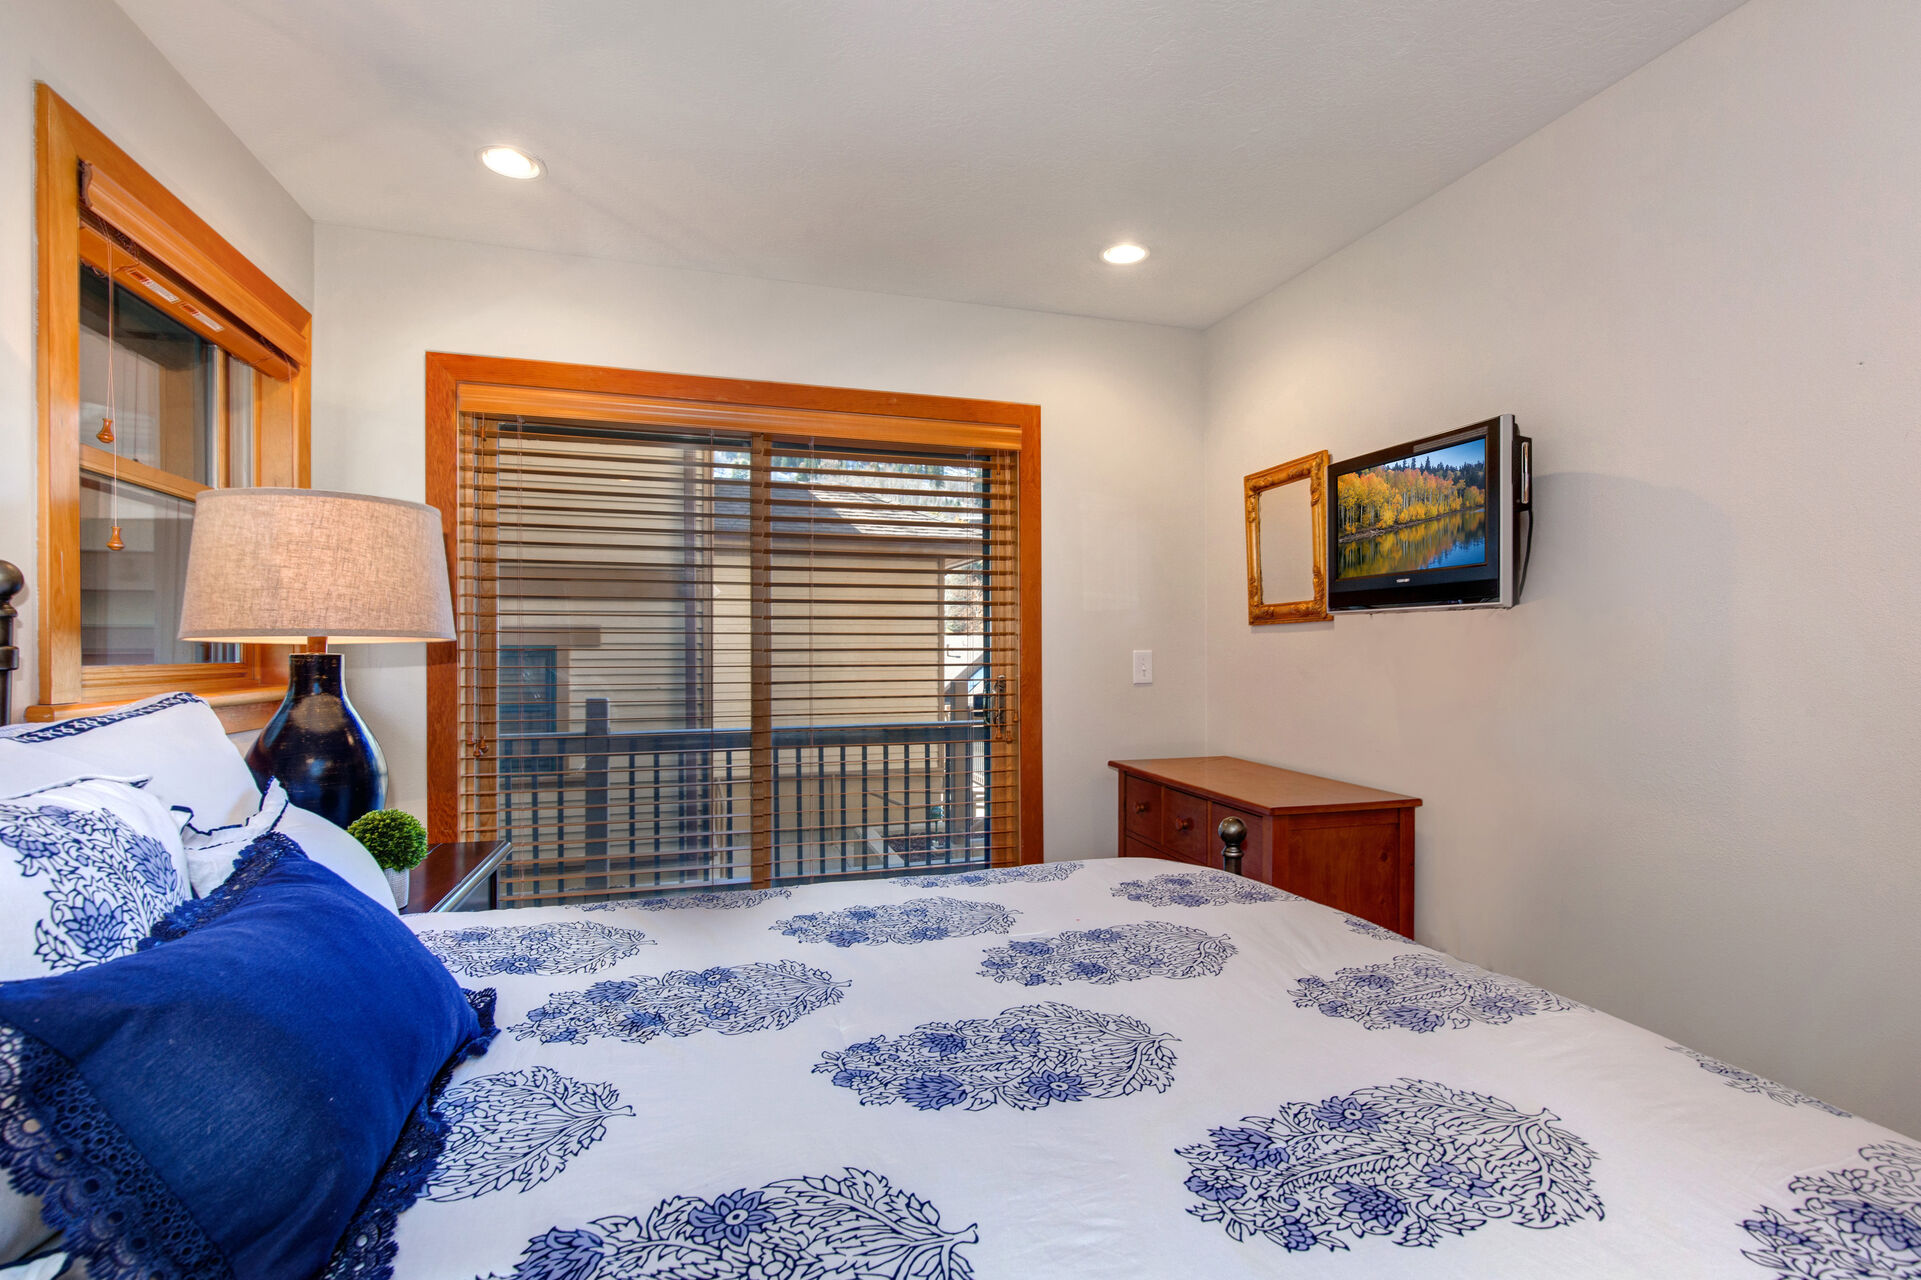 Bedroom 2 with queen bed, private balcony access, 19